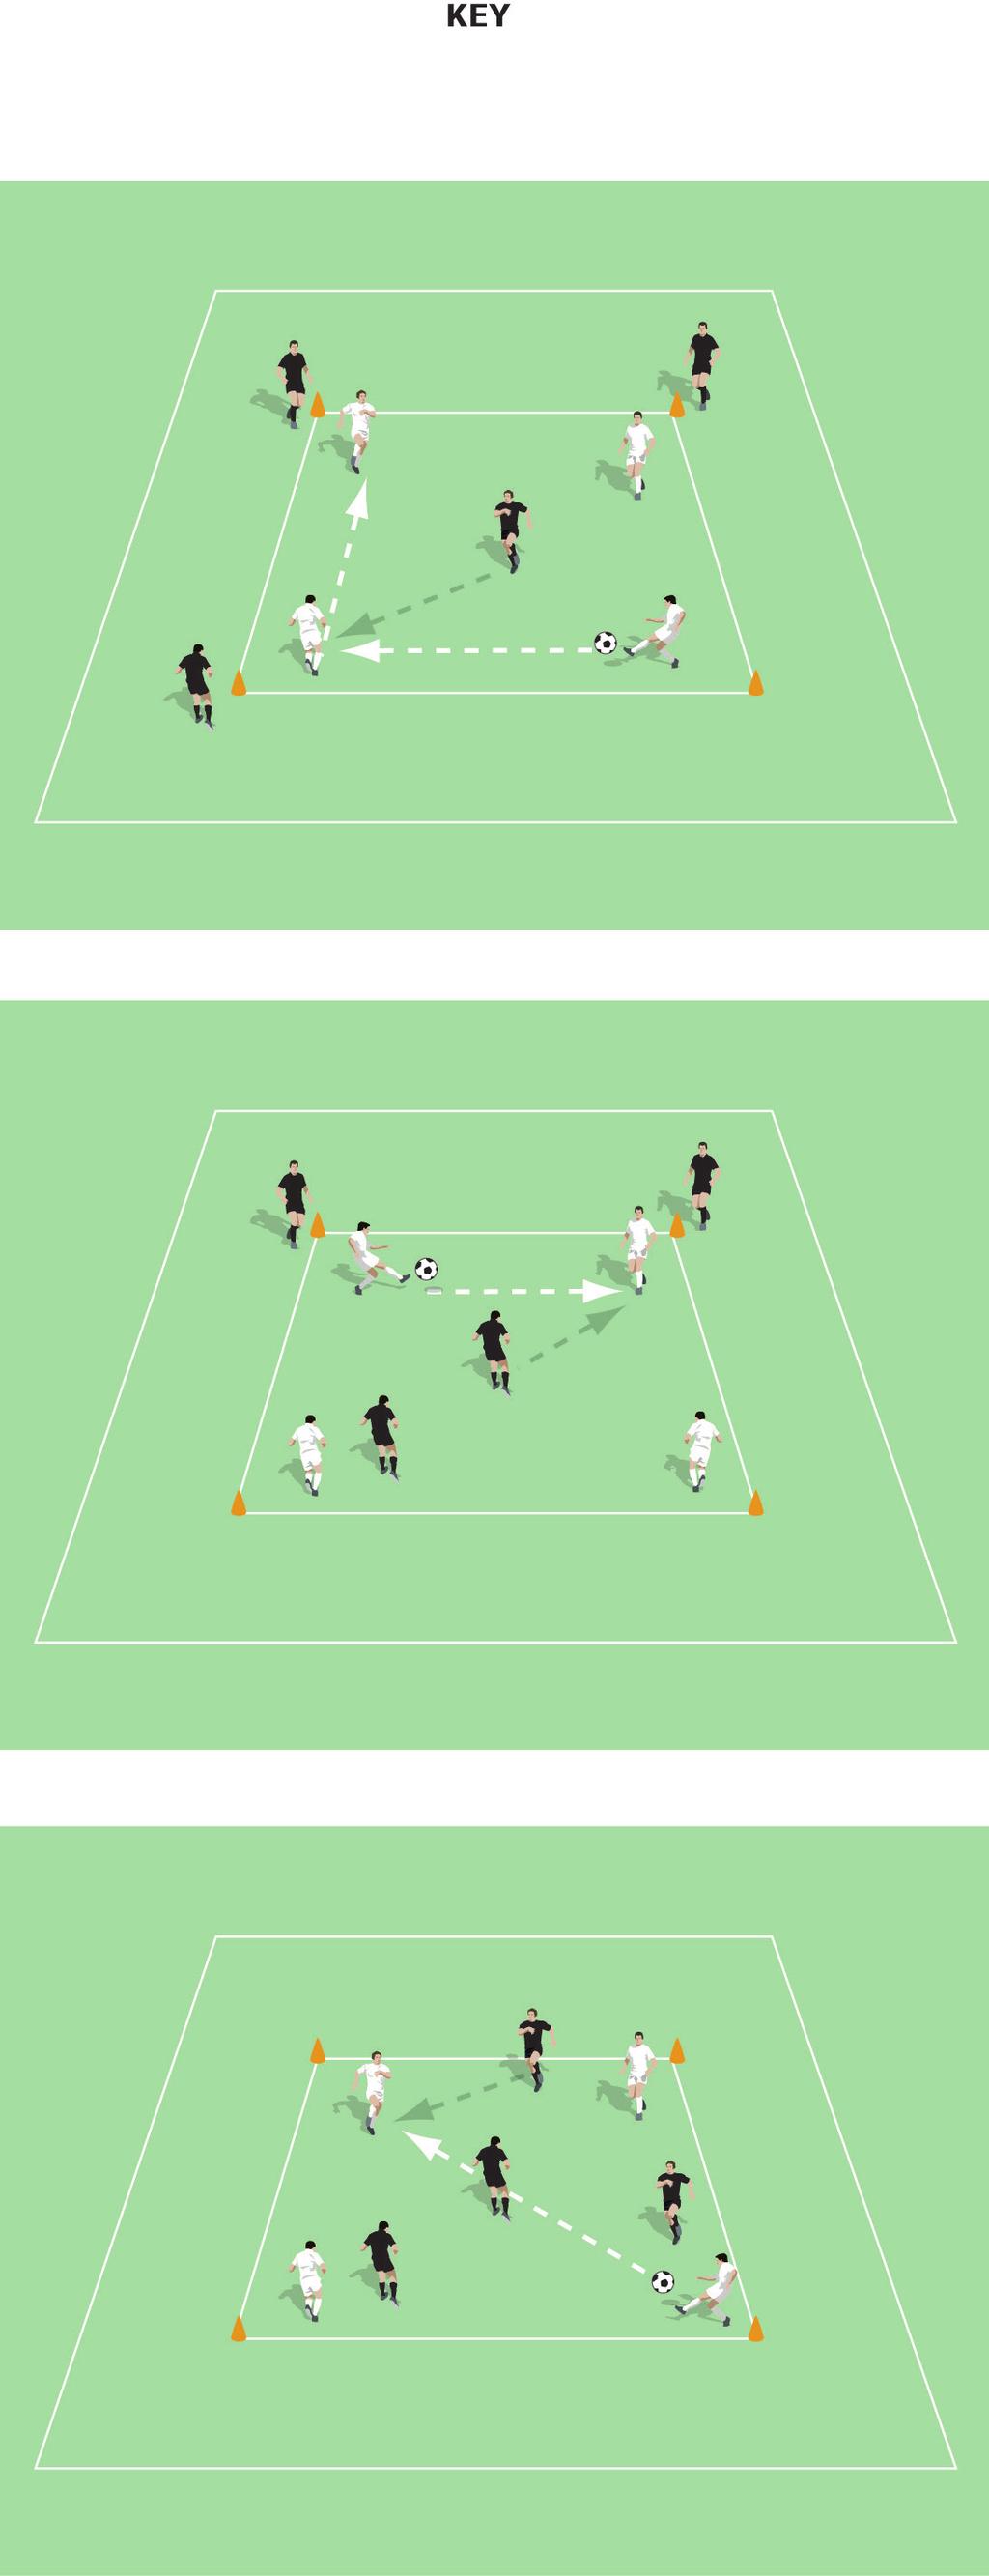 Possession - Add One BALL MOVEMENT PLAYER MOVEMENT Outer pitch size: 0 x 0 yards Inner pitch size: 5 x 5 yards Two teams of four payers No goas Rues One team act as the passing team.